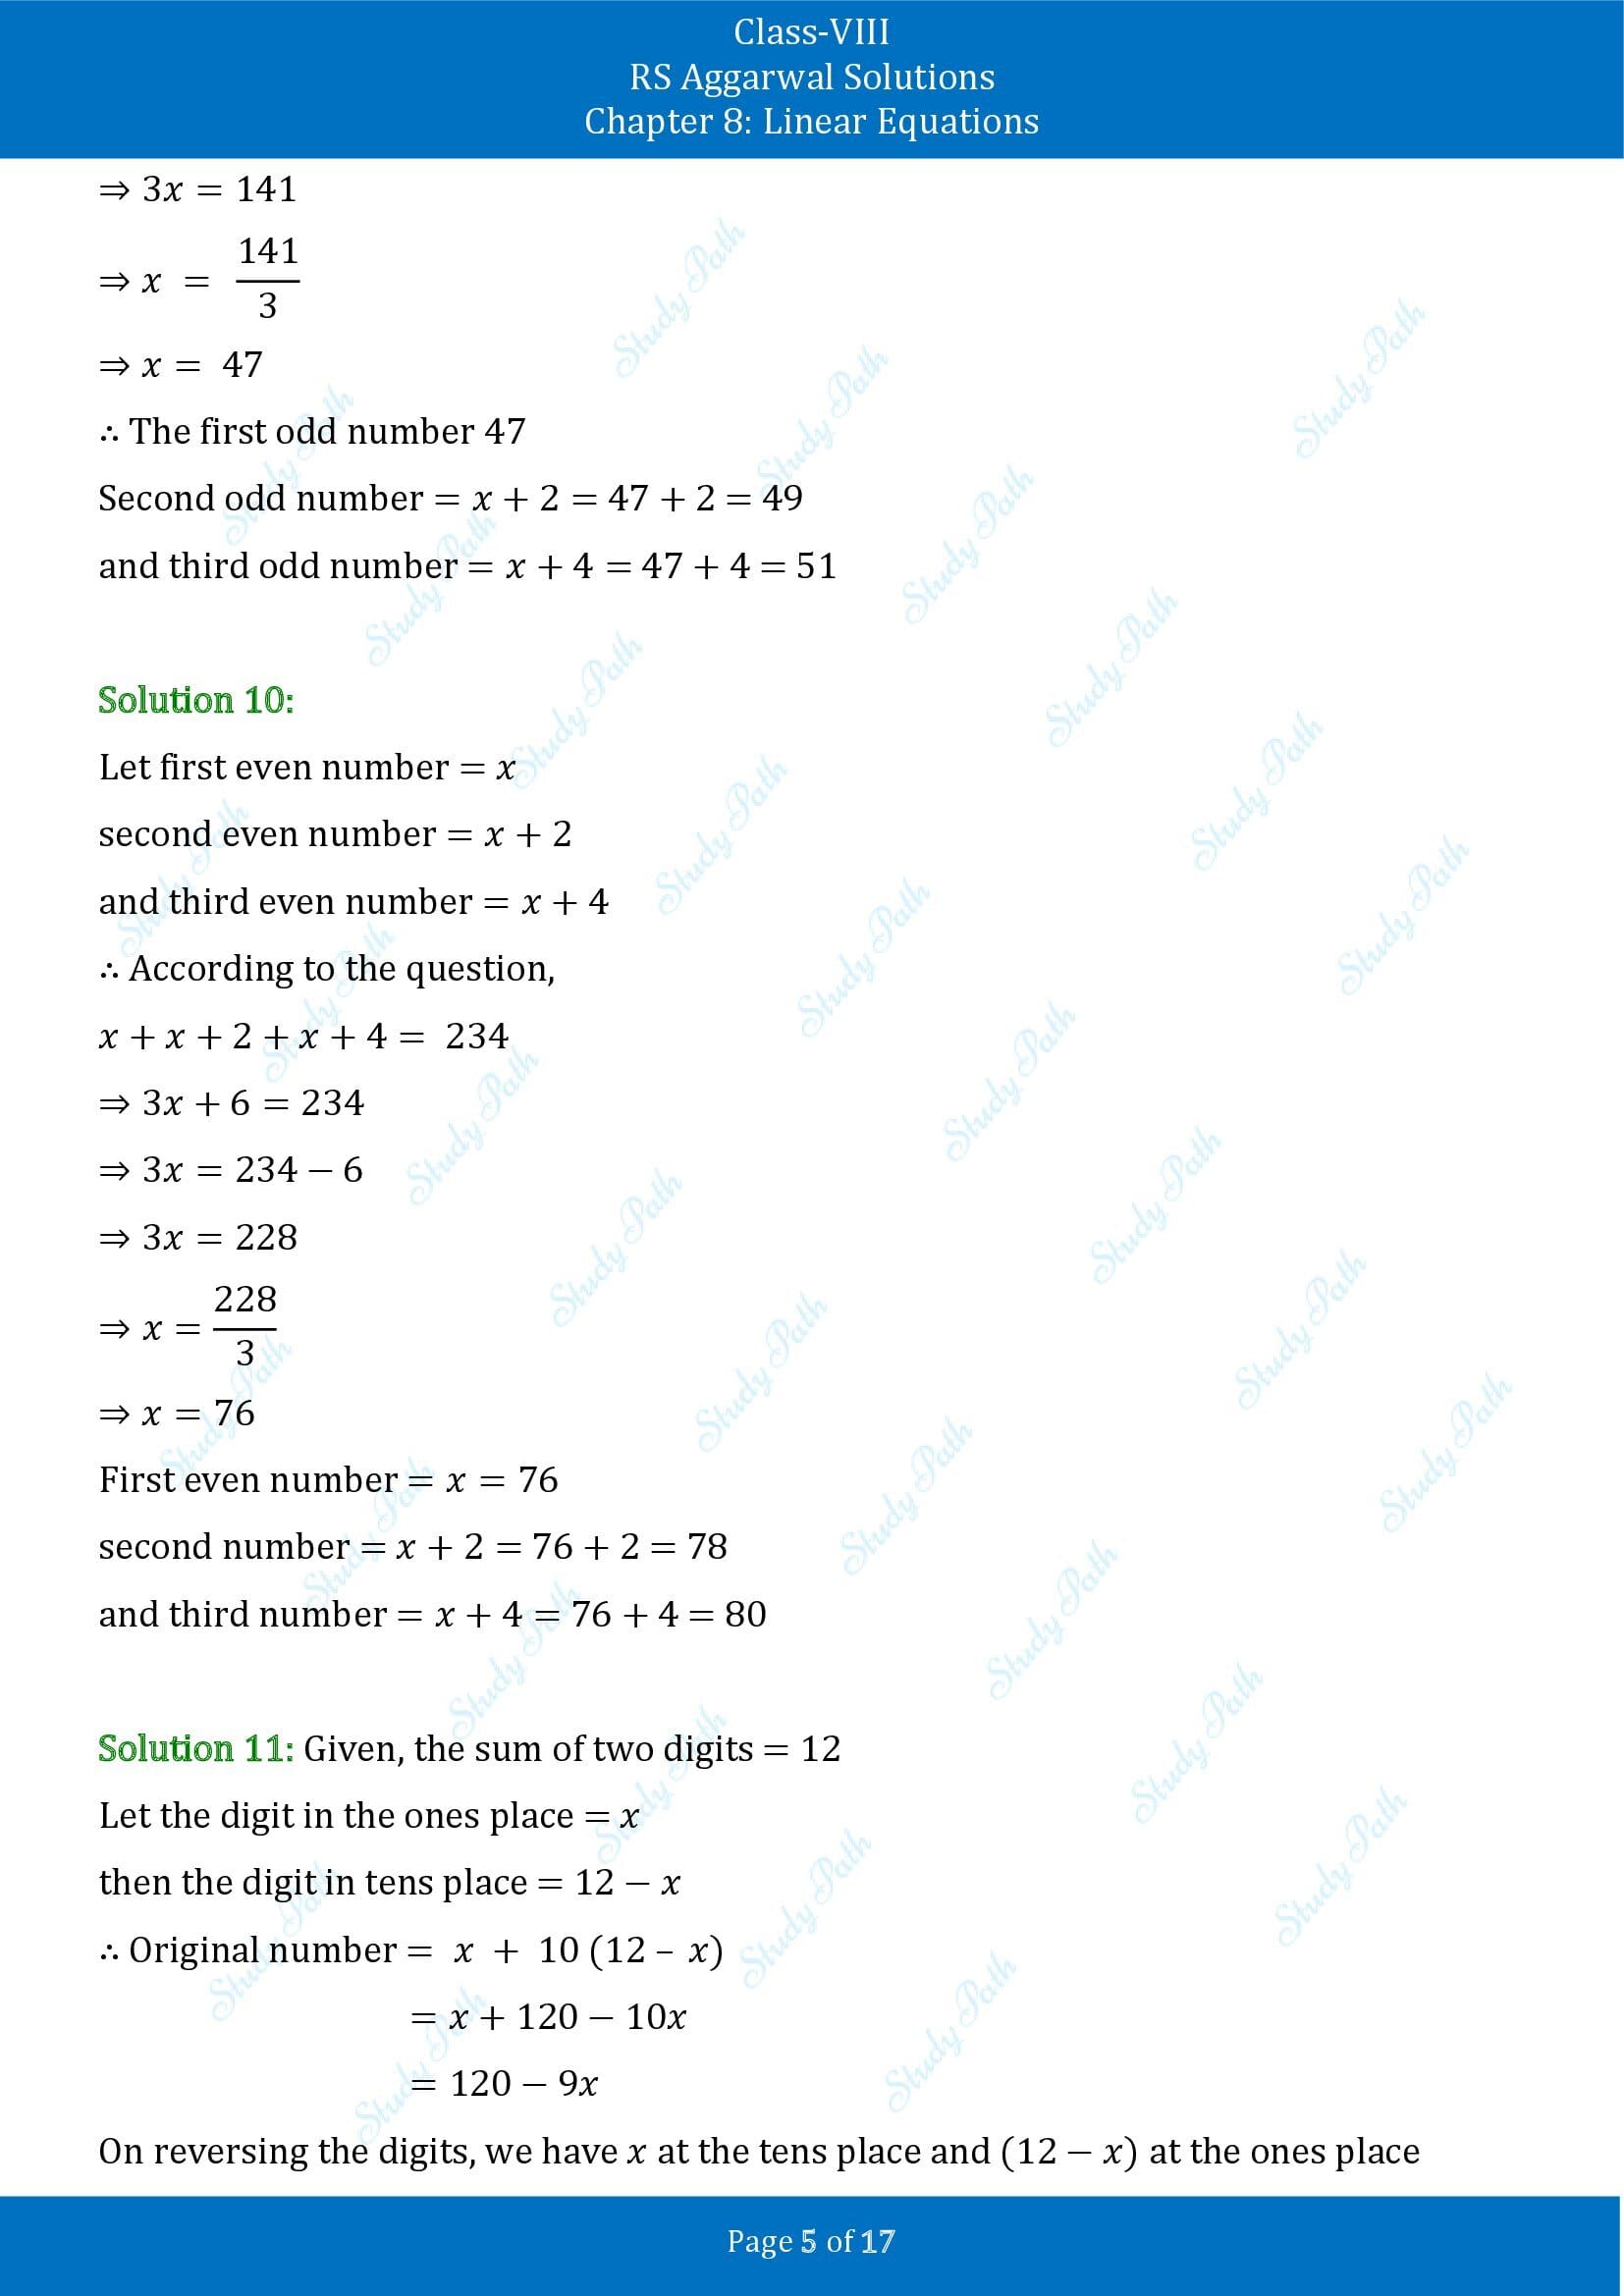 RS Aggarwal Solutions Class 8 Chapter 8 Linear Equations Exercise 8B 00005